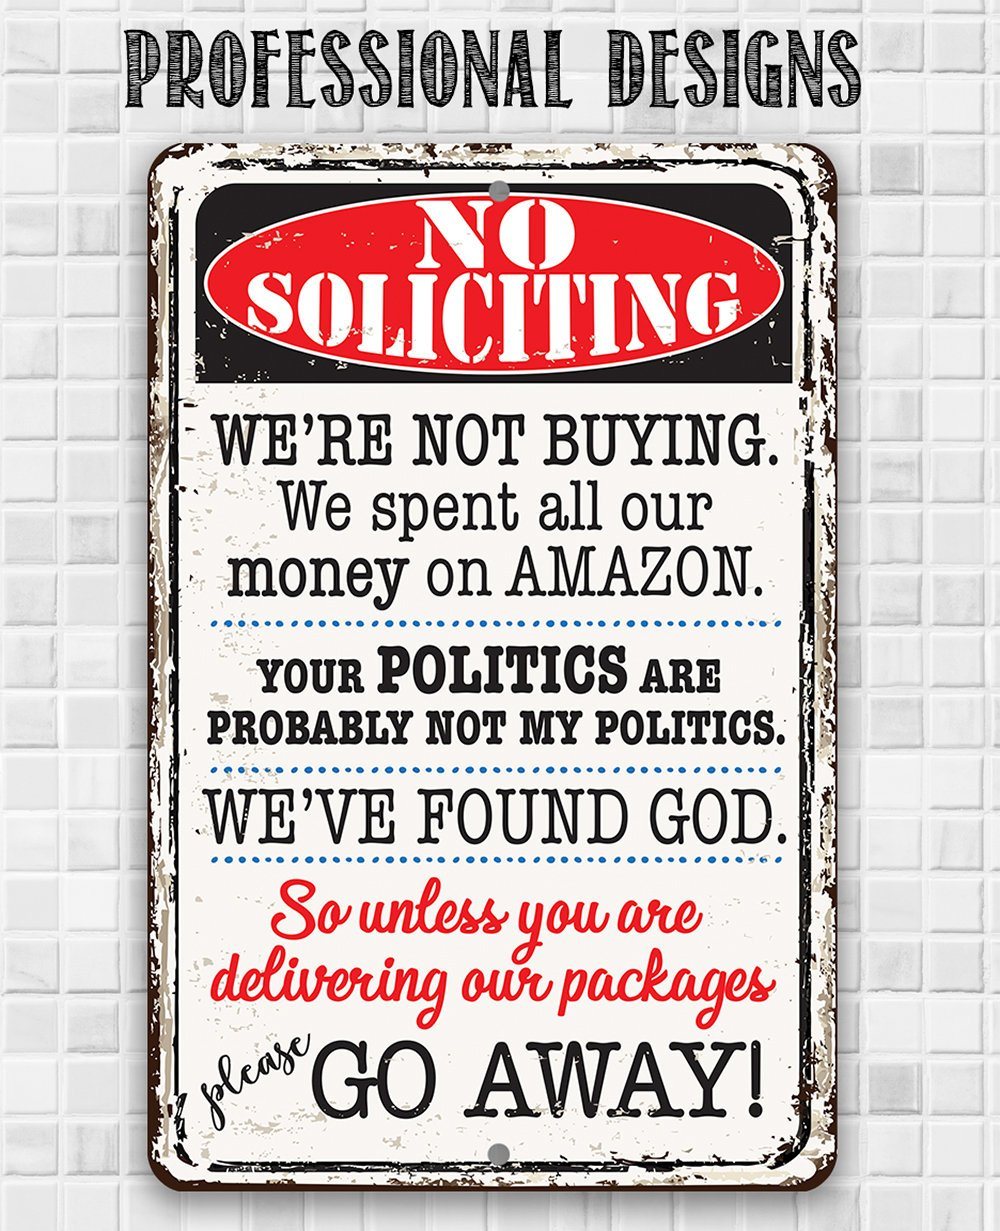 No Soliciting We're Not Buying - Metal Sign | Lone Star Art.